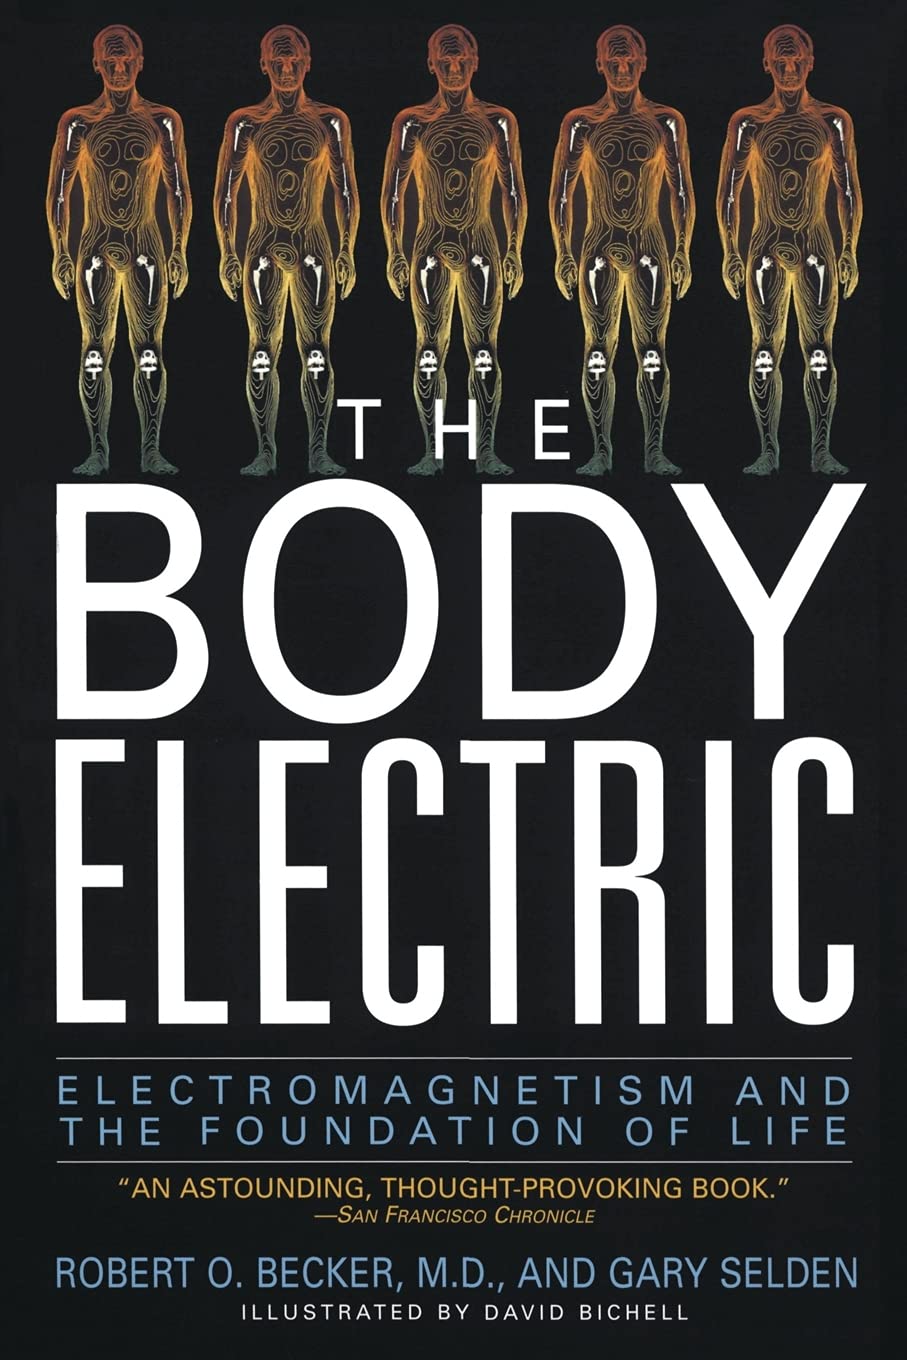 The Body Electric: Electromagnetism and the Foundation of Life by Becker, Robert